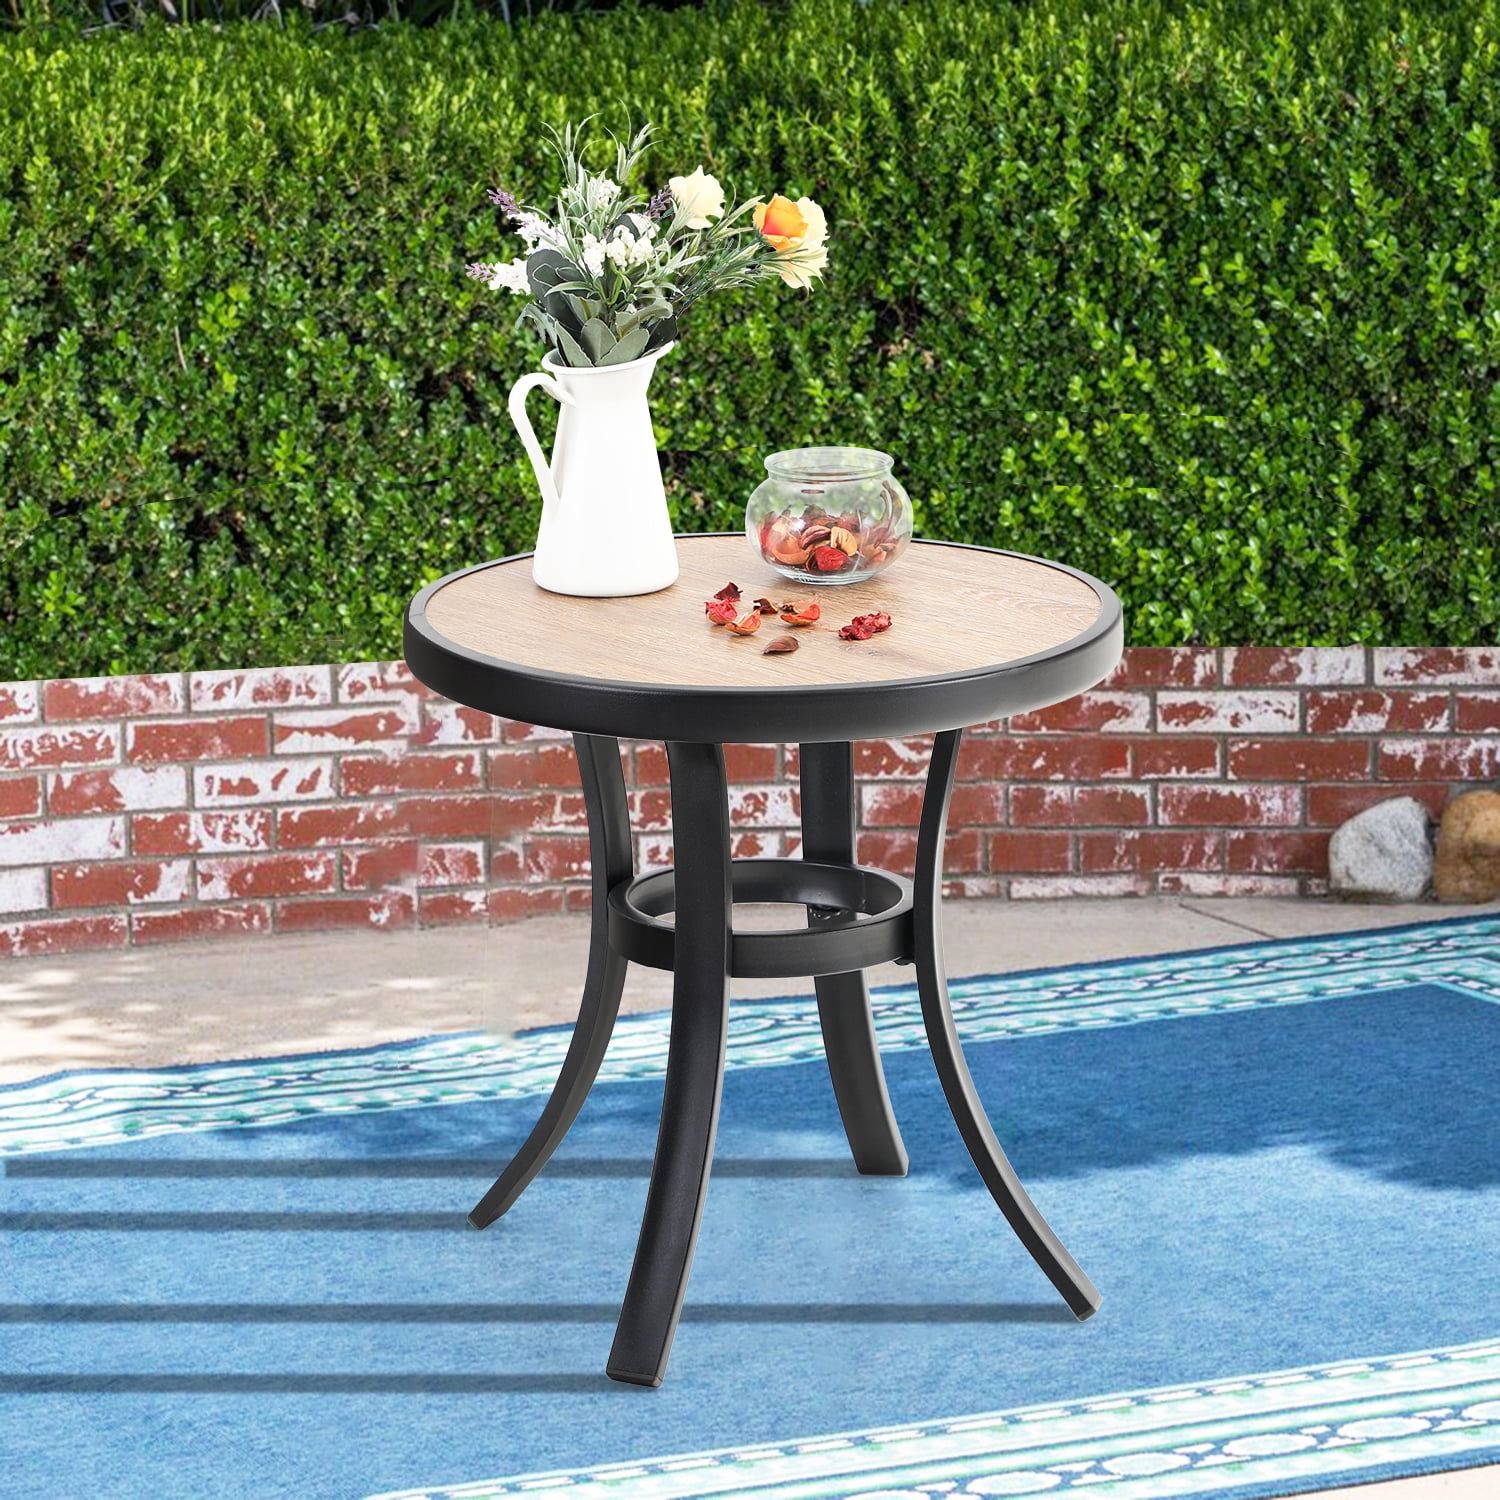 Mf Studio 19 Inches Bistro Side Table, Outdoor Coffee Table Wooden Like Regarding Outdoor Half Round Coffee Tables (Gallery 6 of 20)